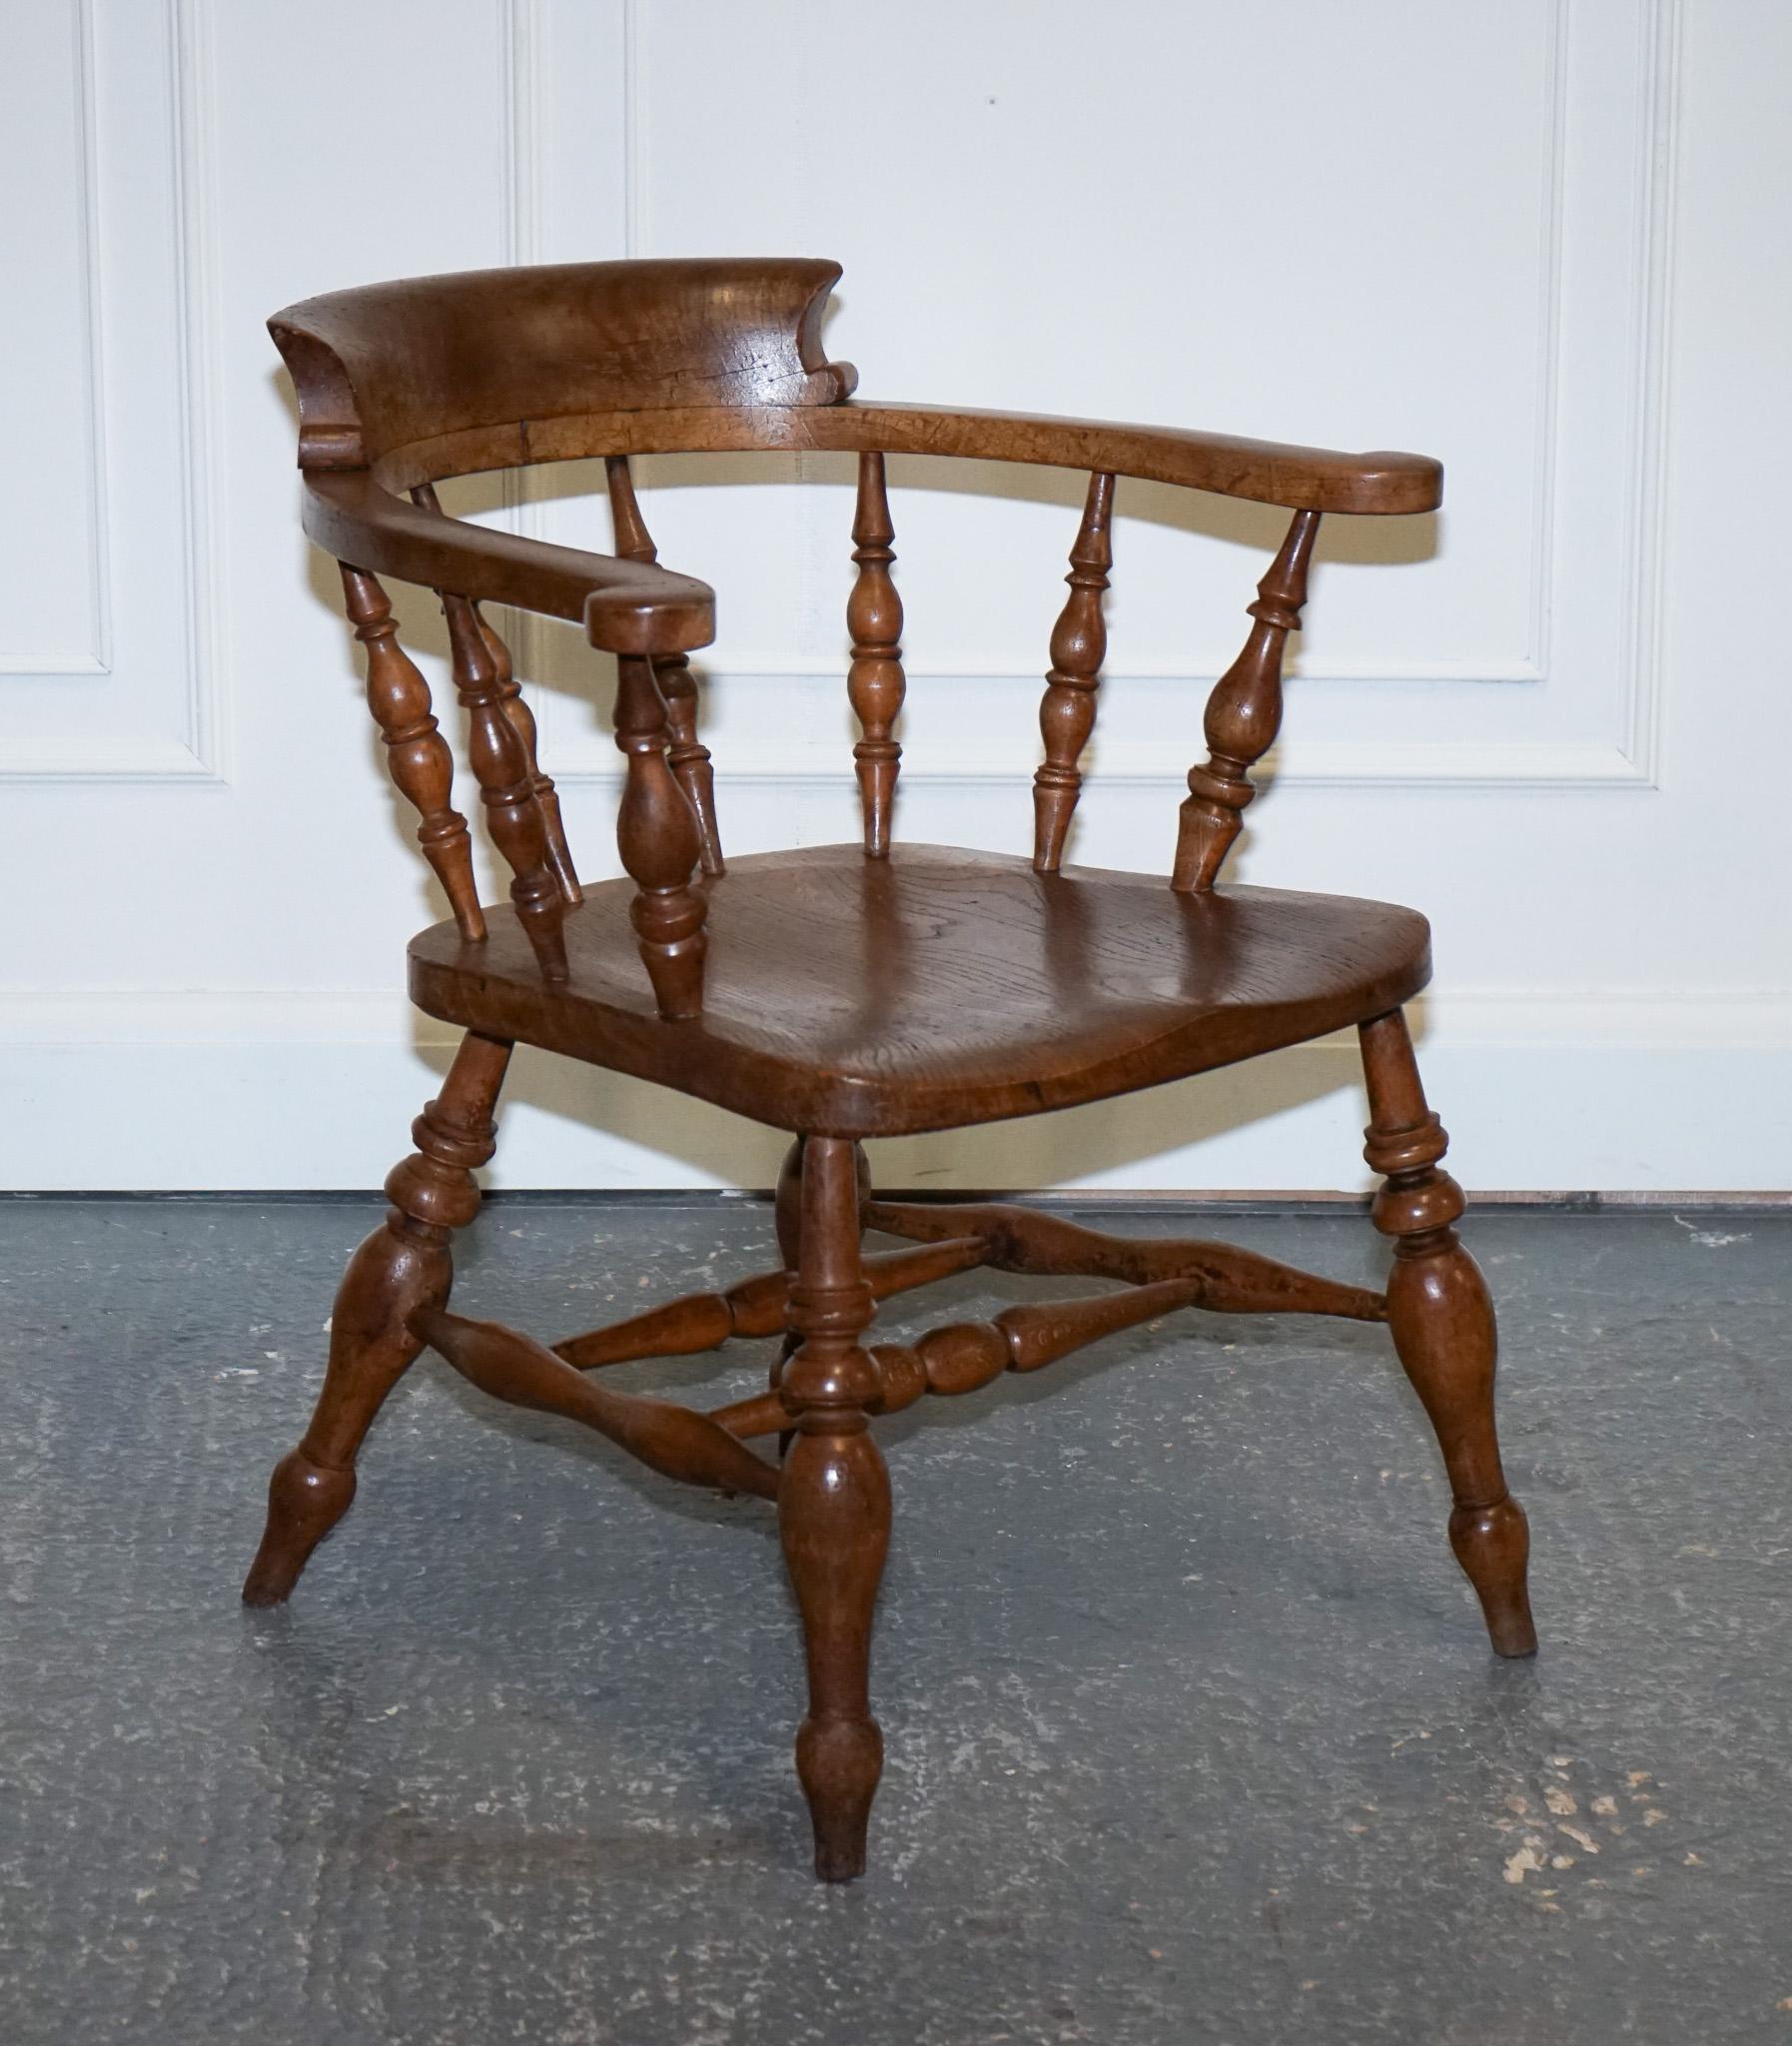 
We are delighted to offer for sale this Gorgeous Elm Smokers Captains Armchair.

This Edwardian solid elm bow back smokers captain's chair is truly stunning, with a gorgeous patina that radiates warmth and character. The chair features a